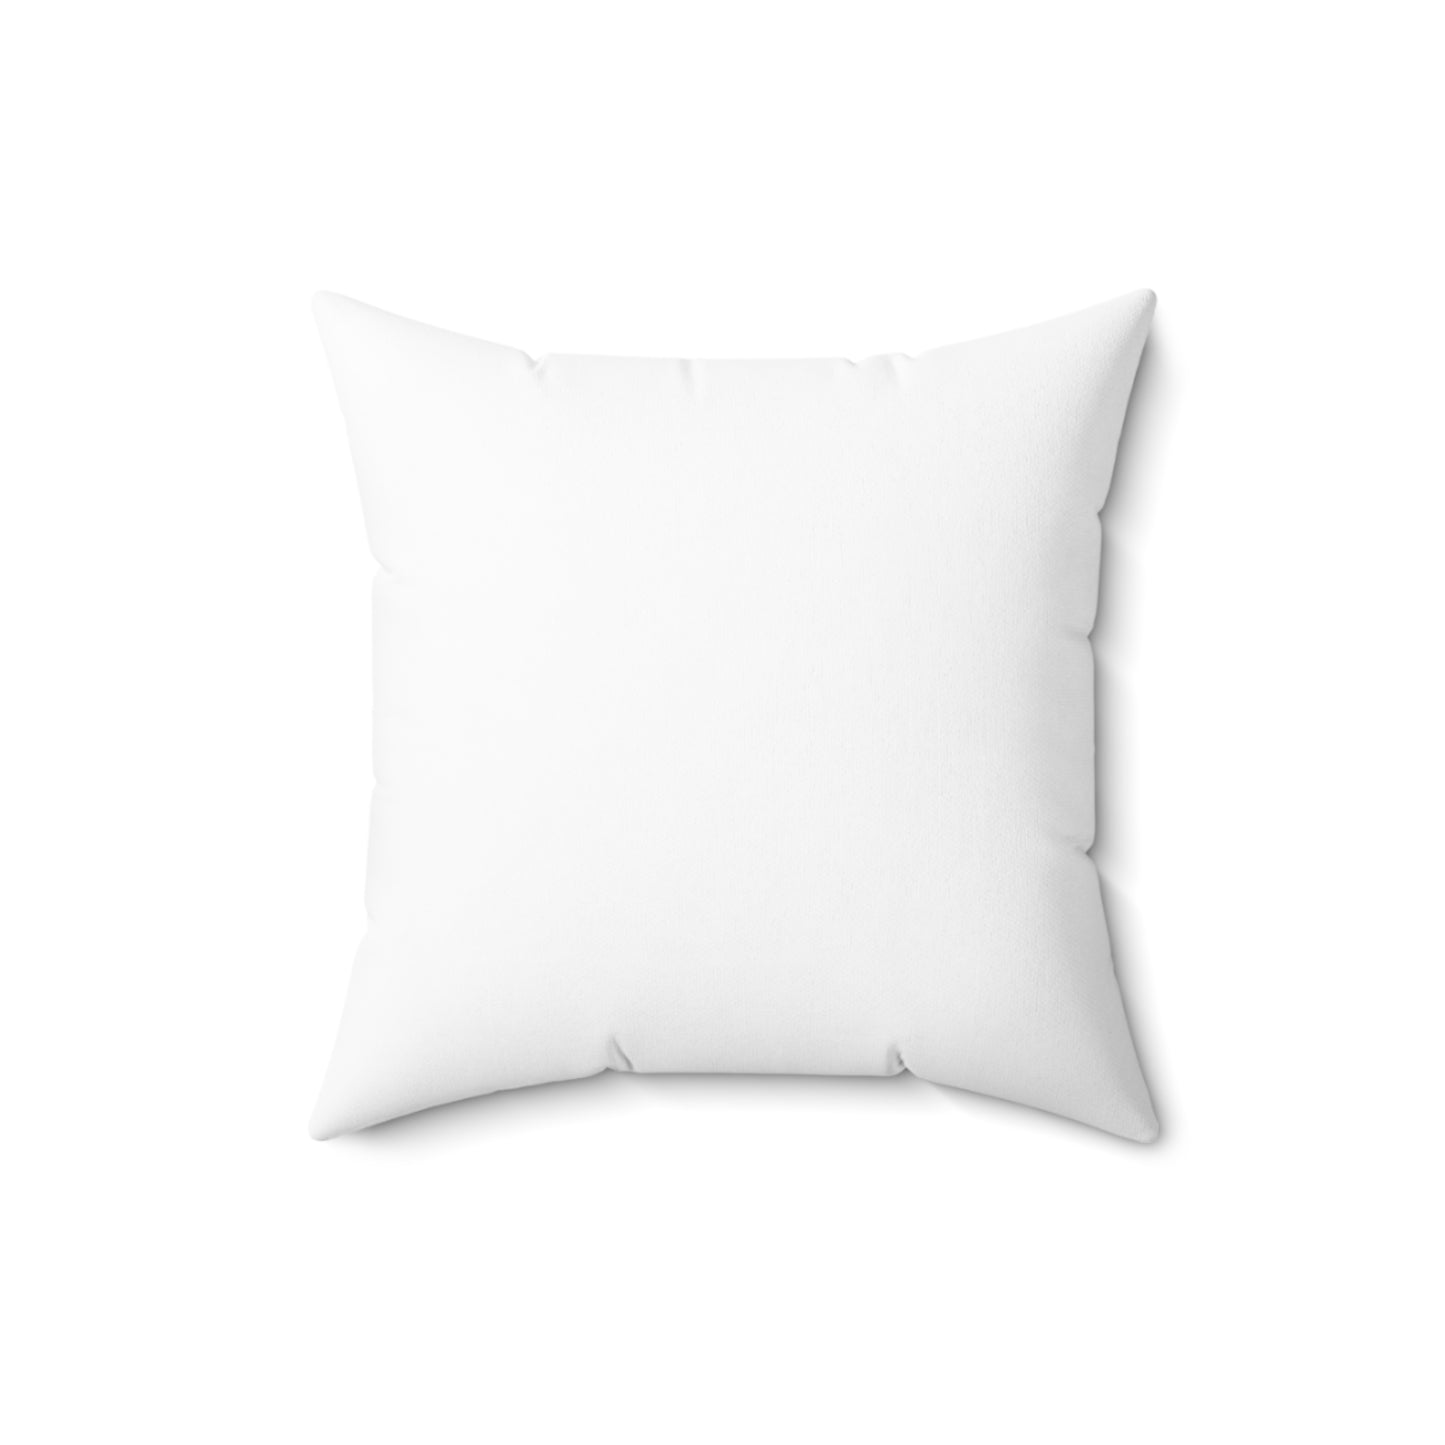 Grateful Pillow with Insert